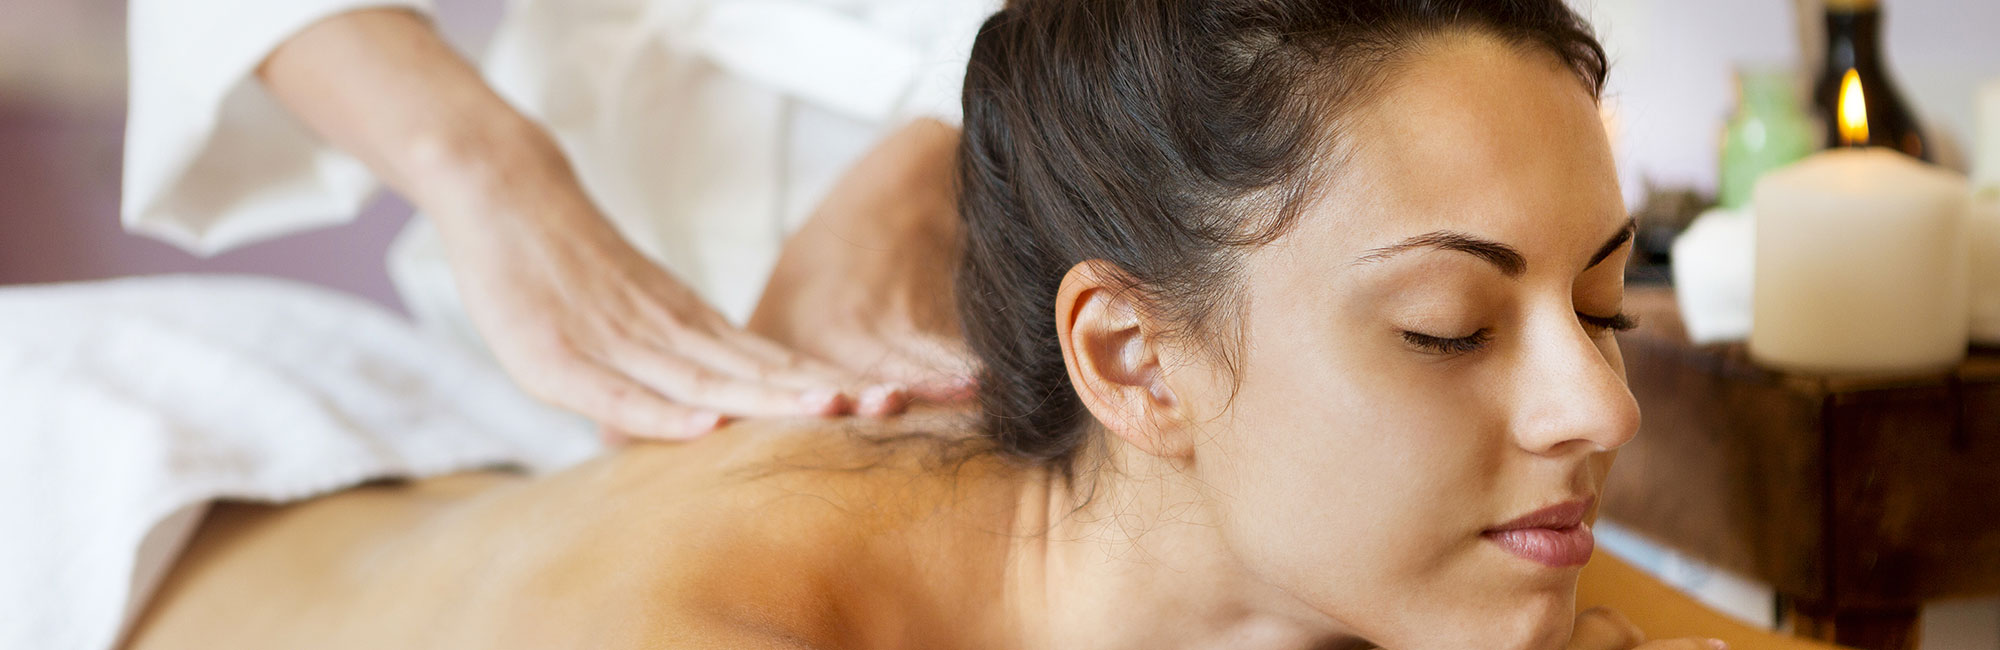 Stay rejuvenated with our massage therapy Pasadena, CA.